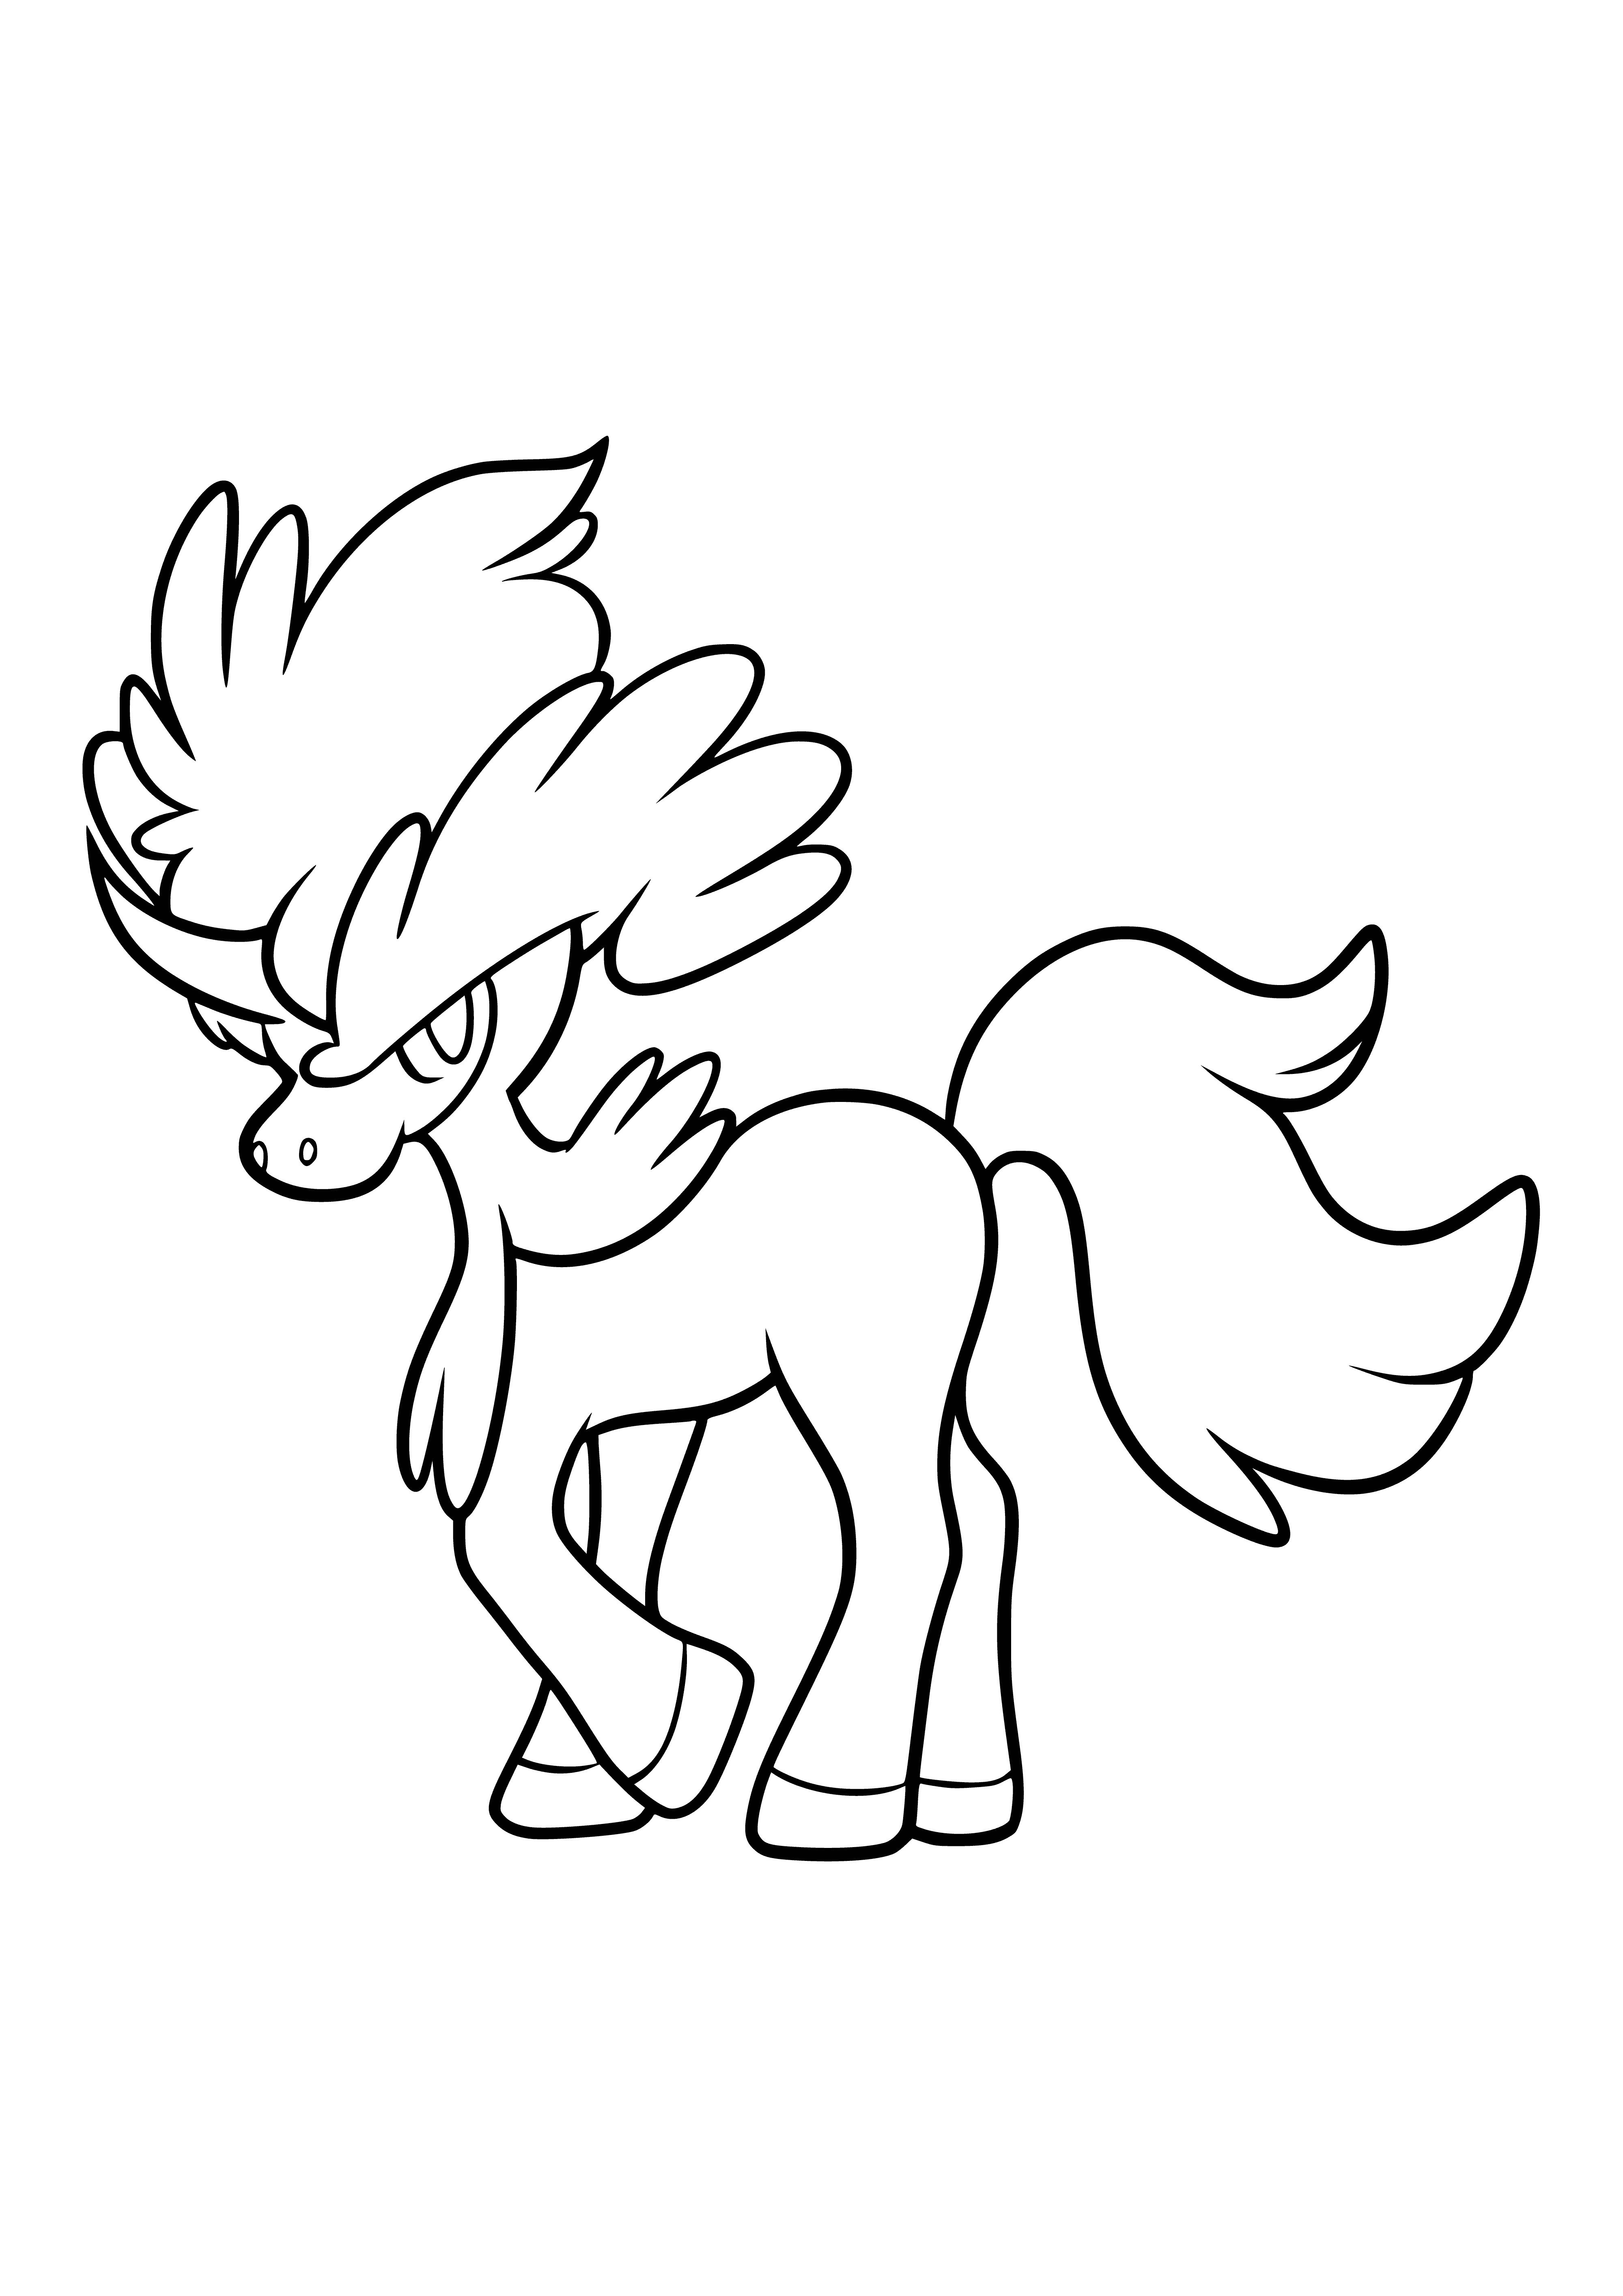 coloring page: Legendary Pokemon Keldeo has a unicorn & dragon body; mostly blue with white markings & a spiraling horn. Long fish-like tail.